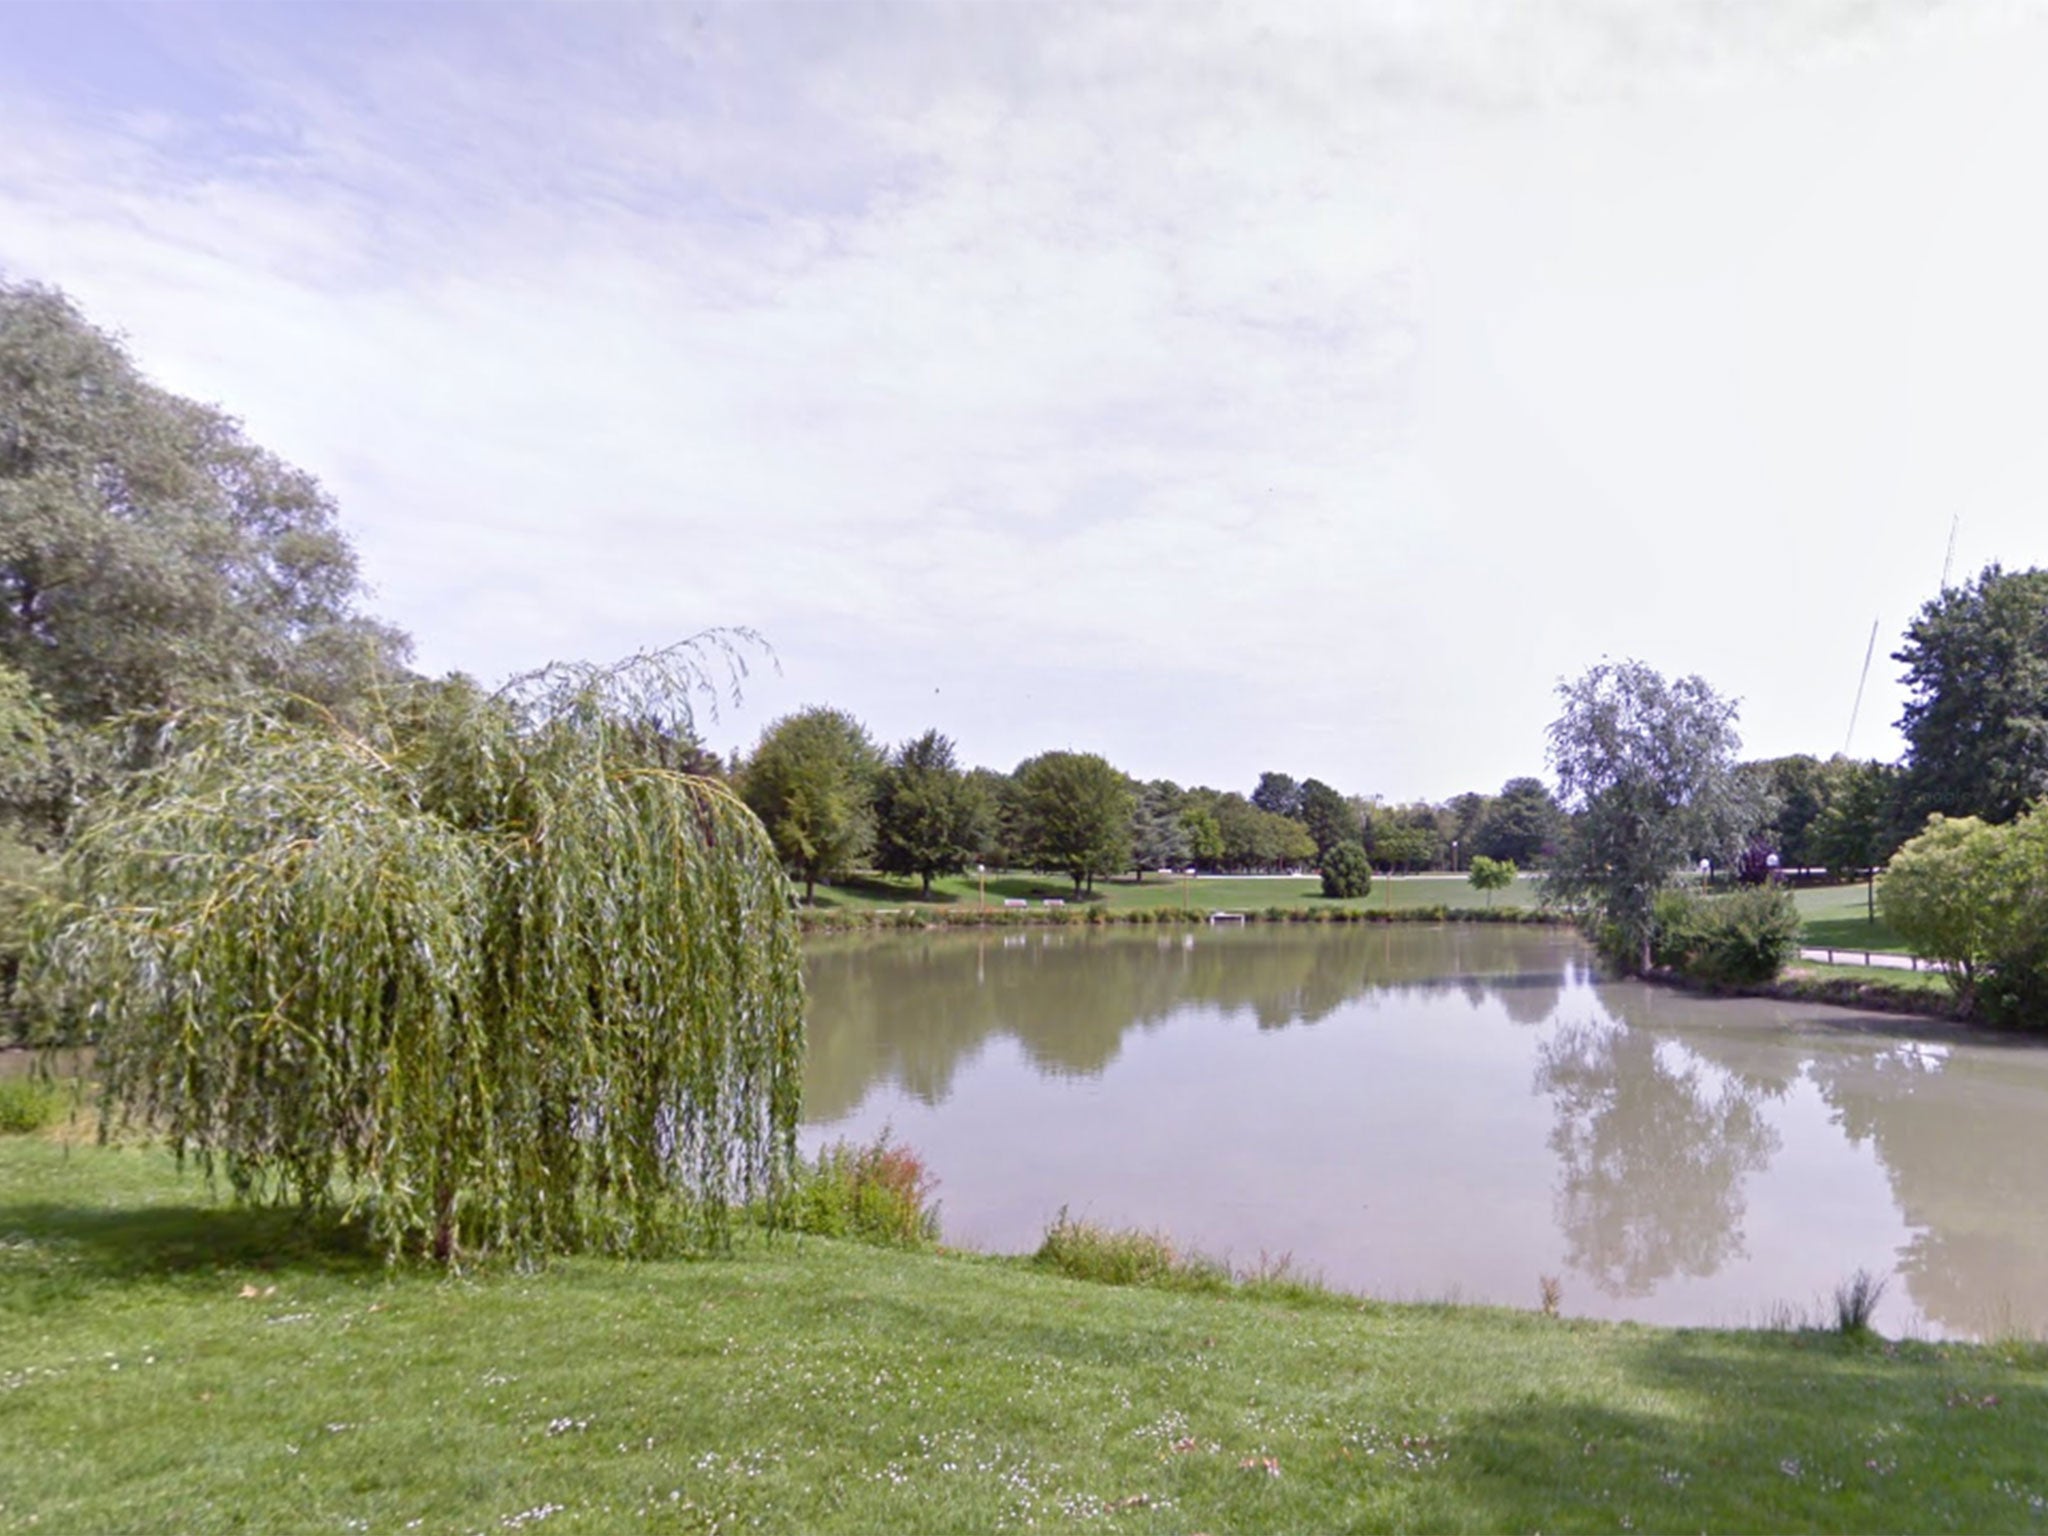 The unnamed 21-year-old victim was sunbathing in the Parc Léo Lagrange in Reims